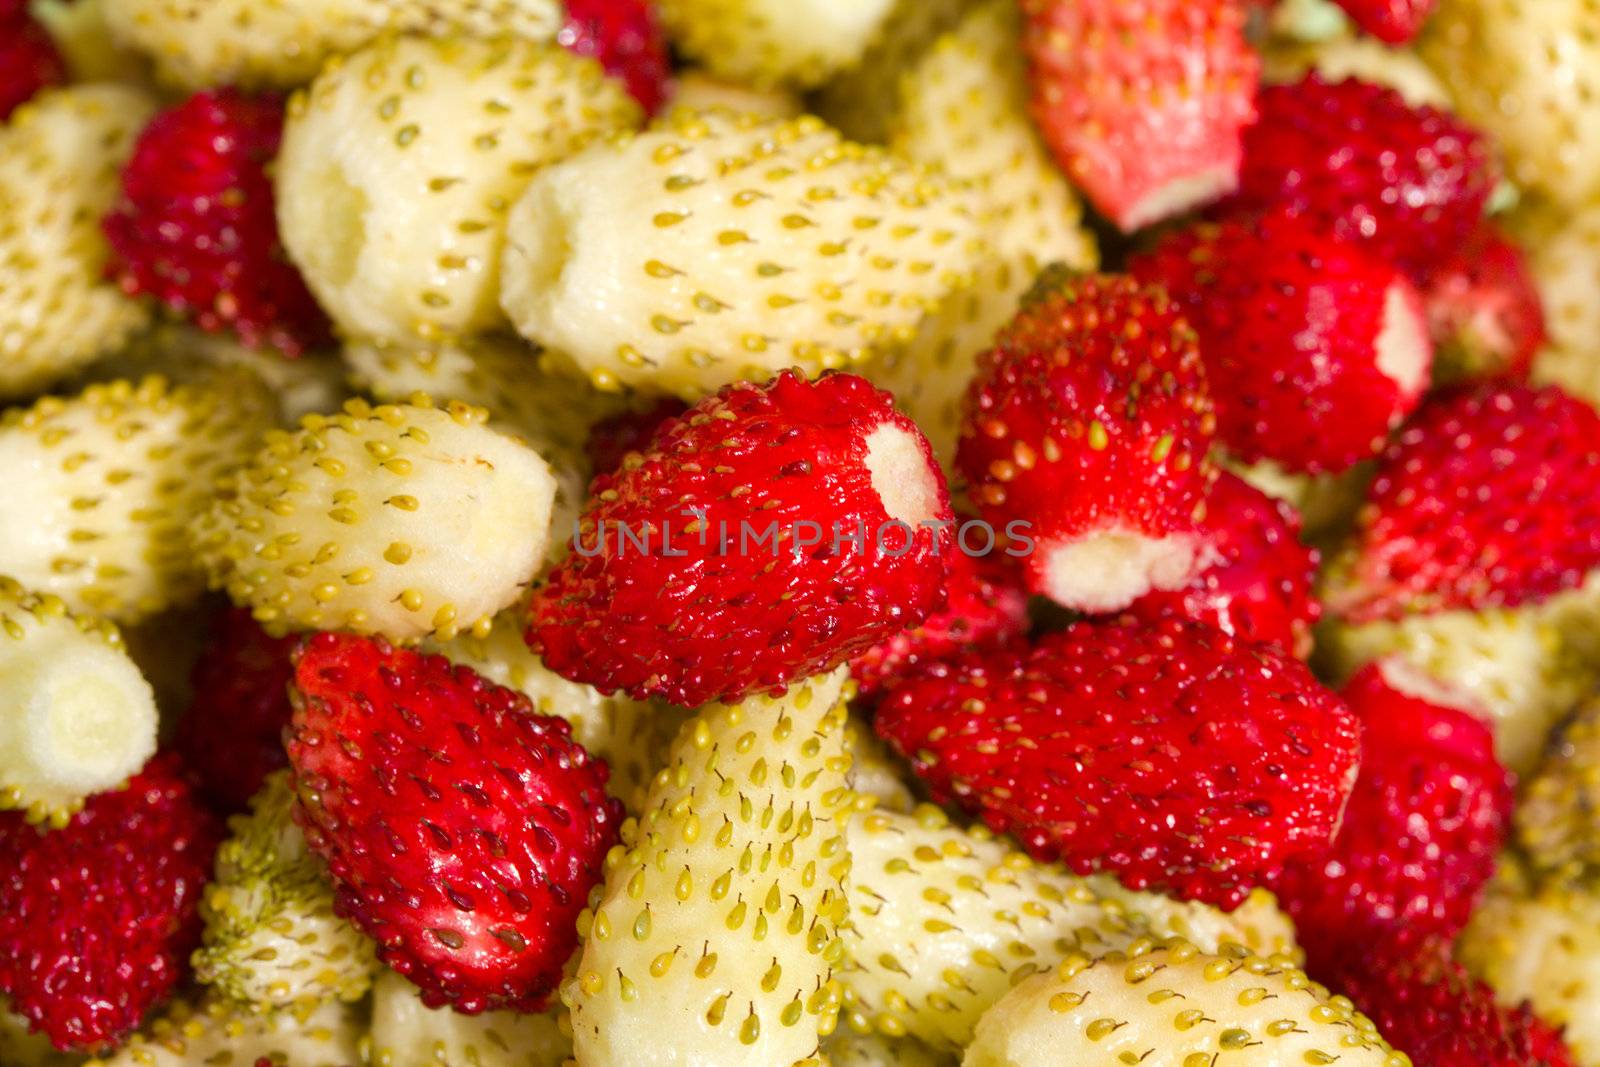 wild strawberries background, selected focus